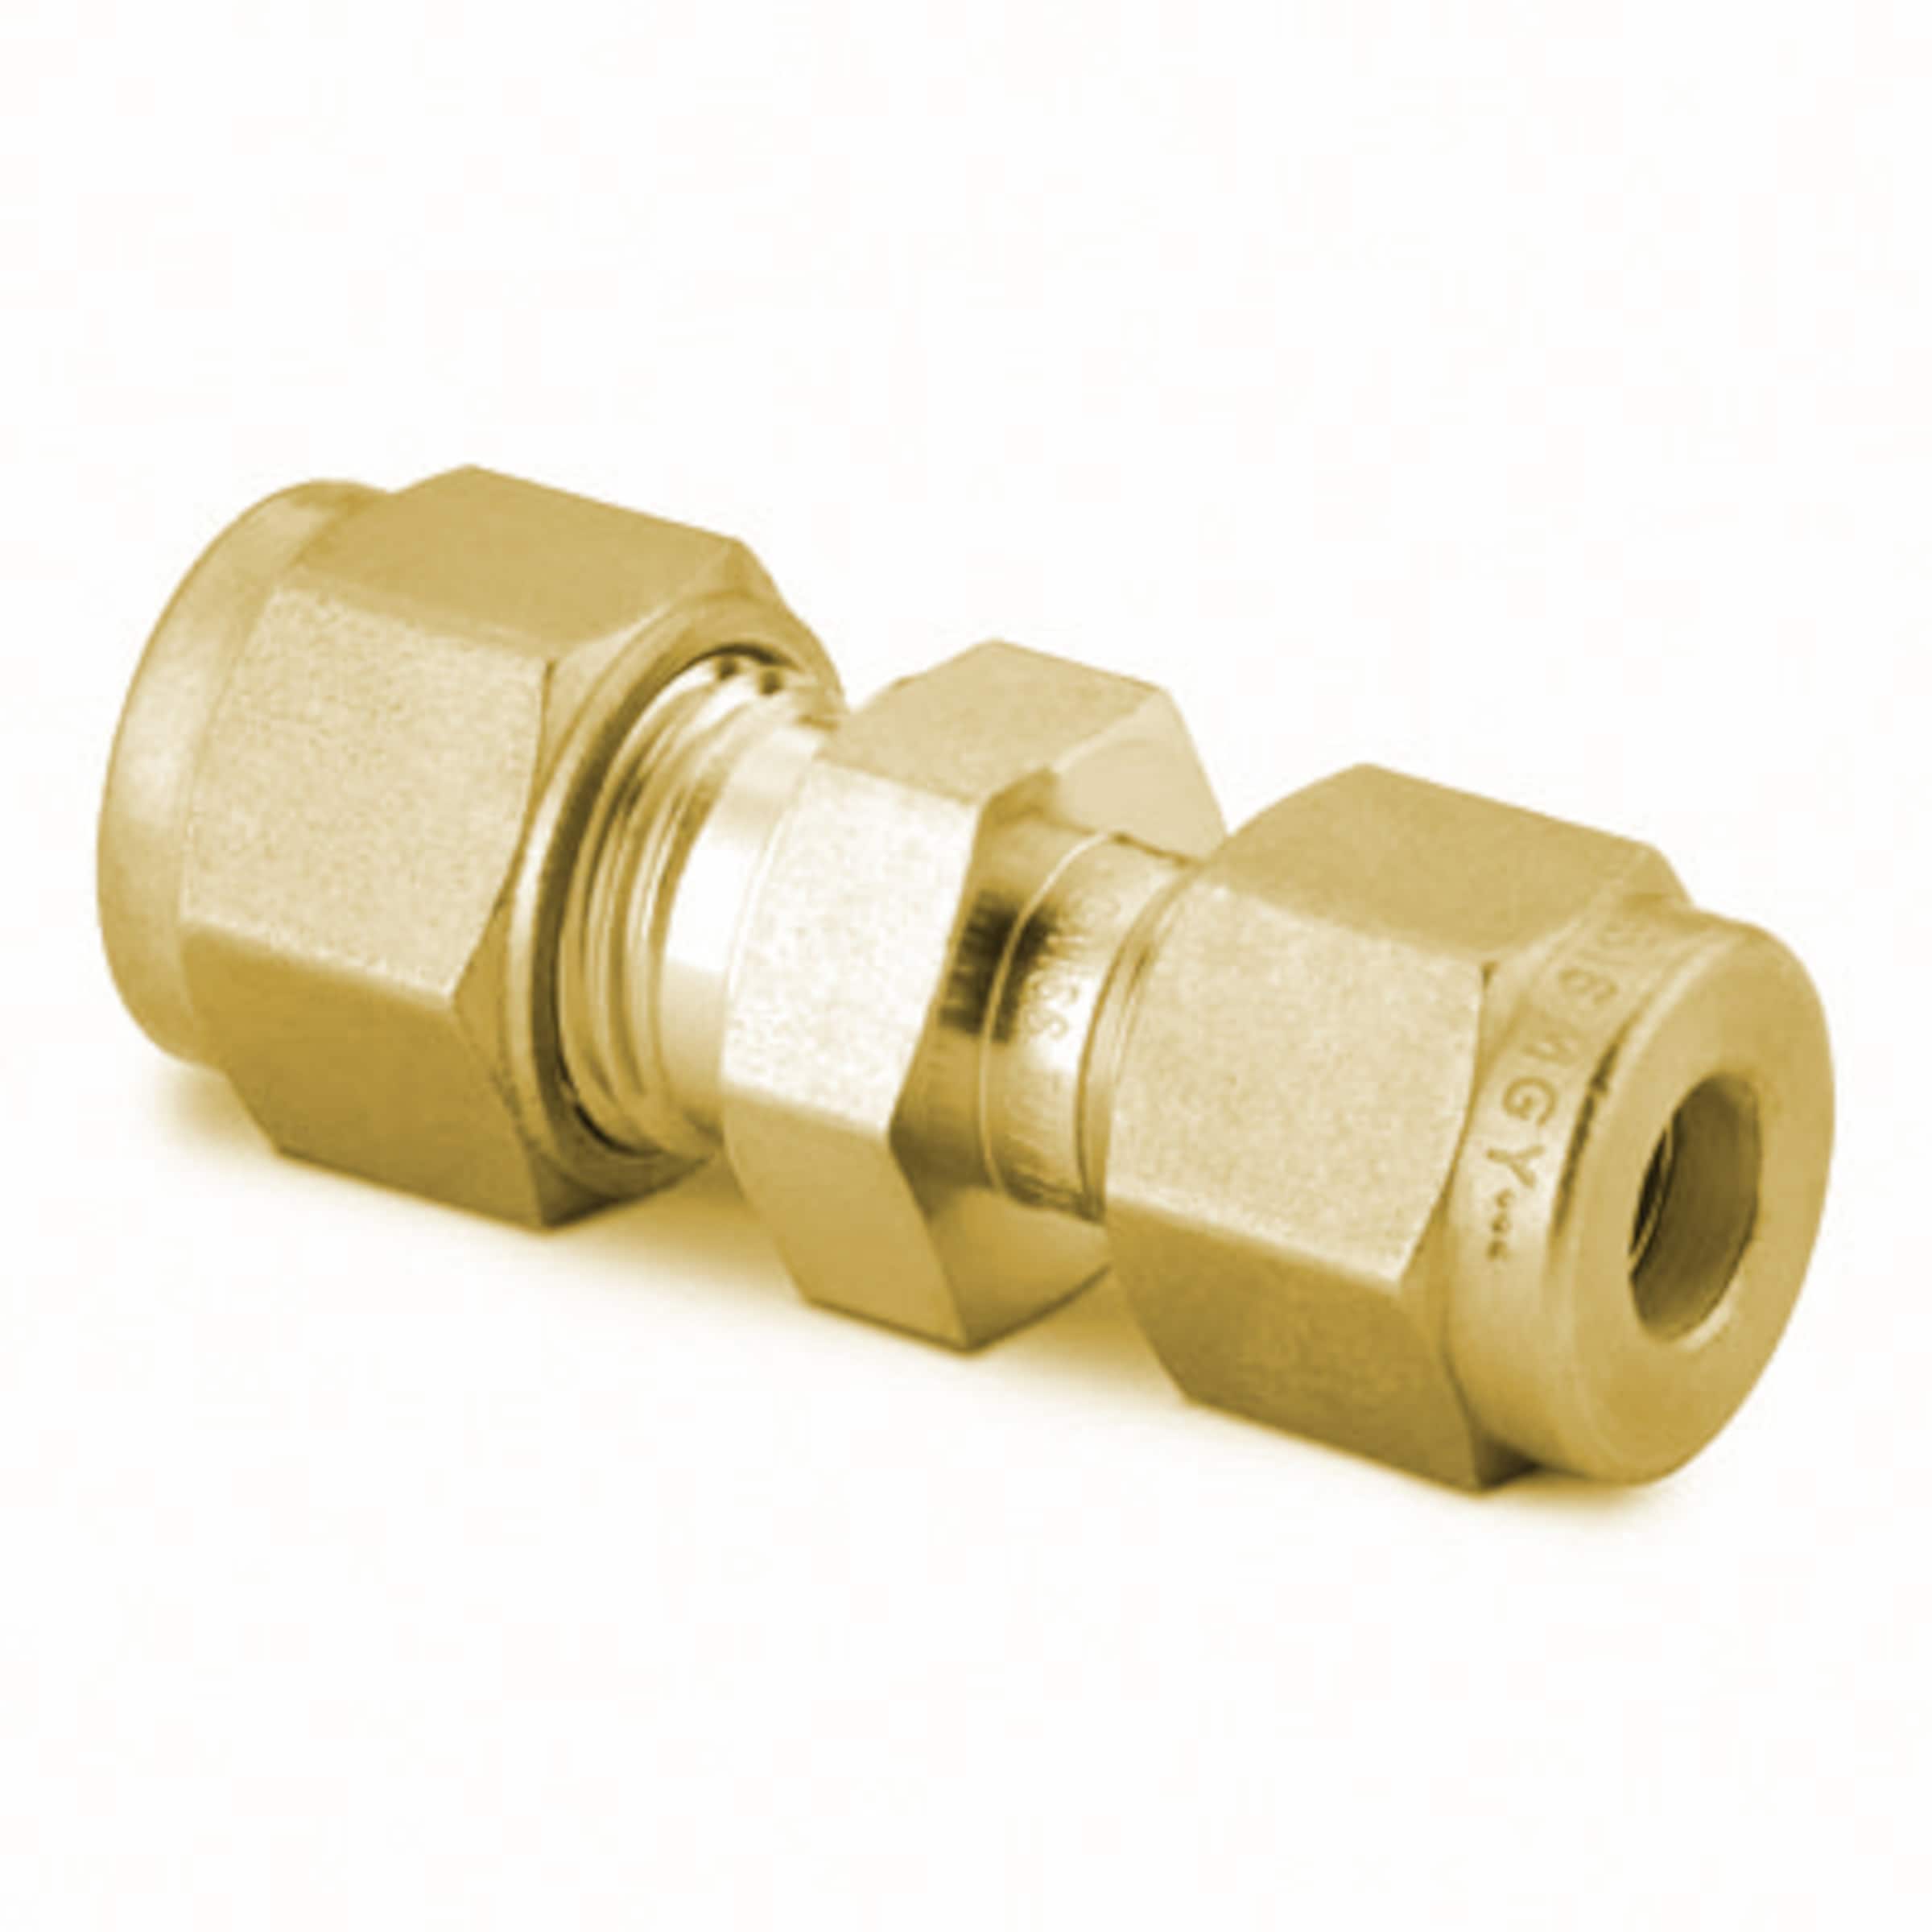 Brass Swagelok Tube Fitting, Union, 10 mm x 3/8 in. Tube OD, Unions, Tube  Fittings and Adapters, Fittings, All Products